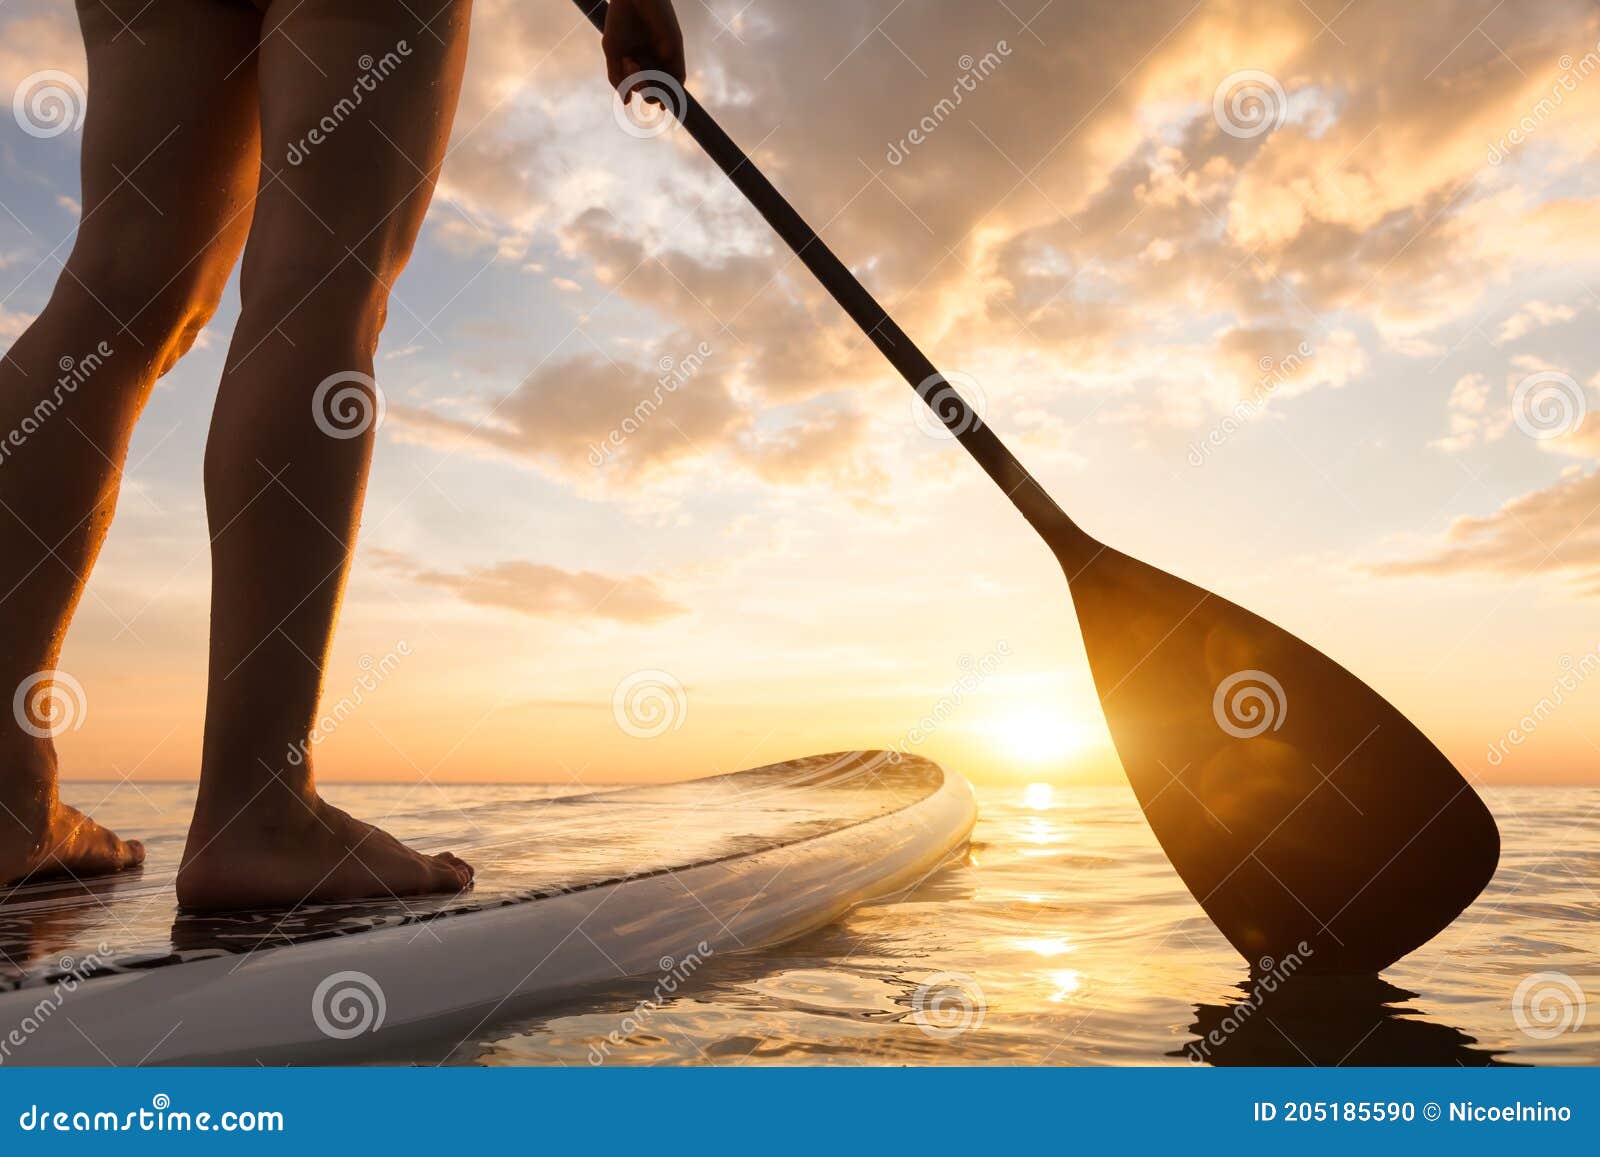 stand up paddle boarding on quiet sea, legs close-up, sunset